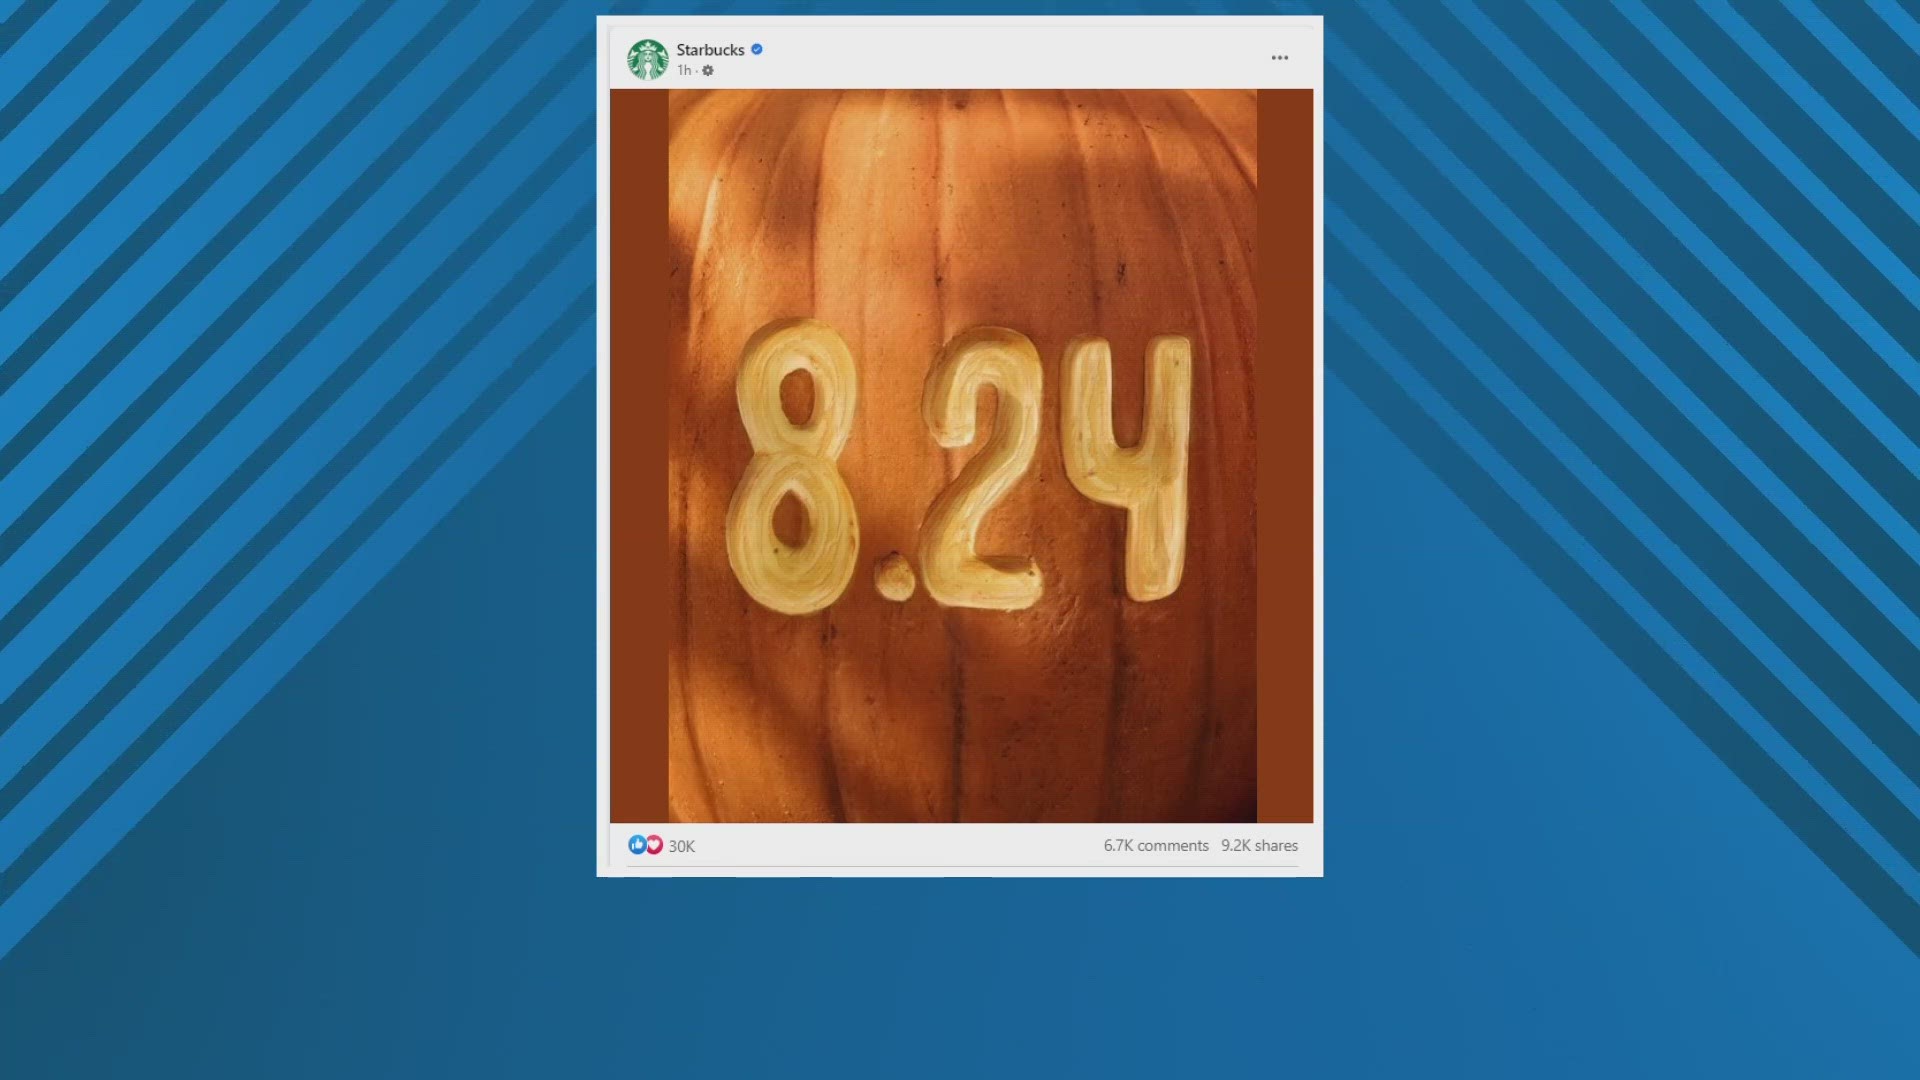 With nearly a month left of summer, Starbucks posted on their Facebook page that their Pumpkin Spice Latte will return to stores on Thursday.